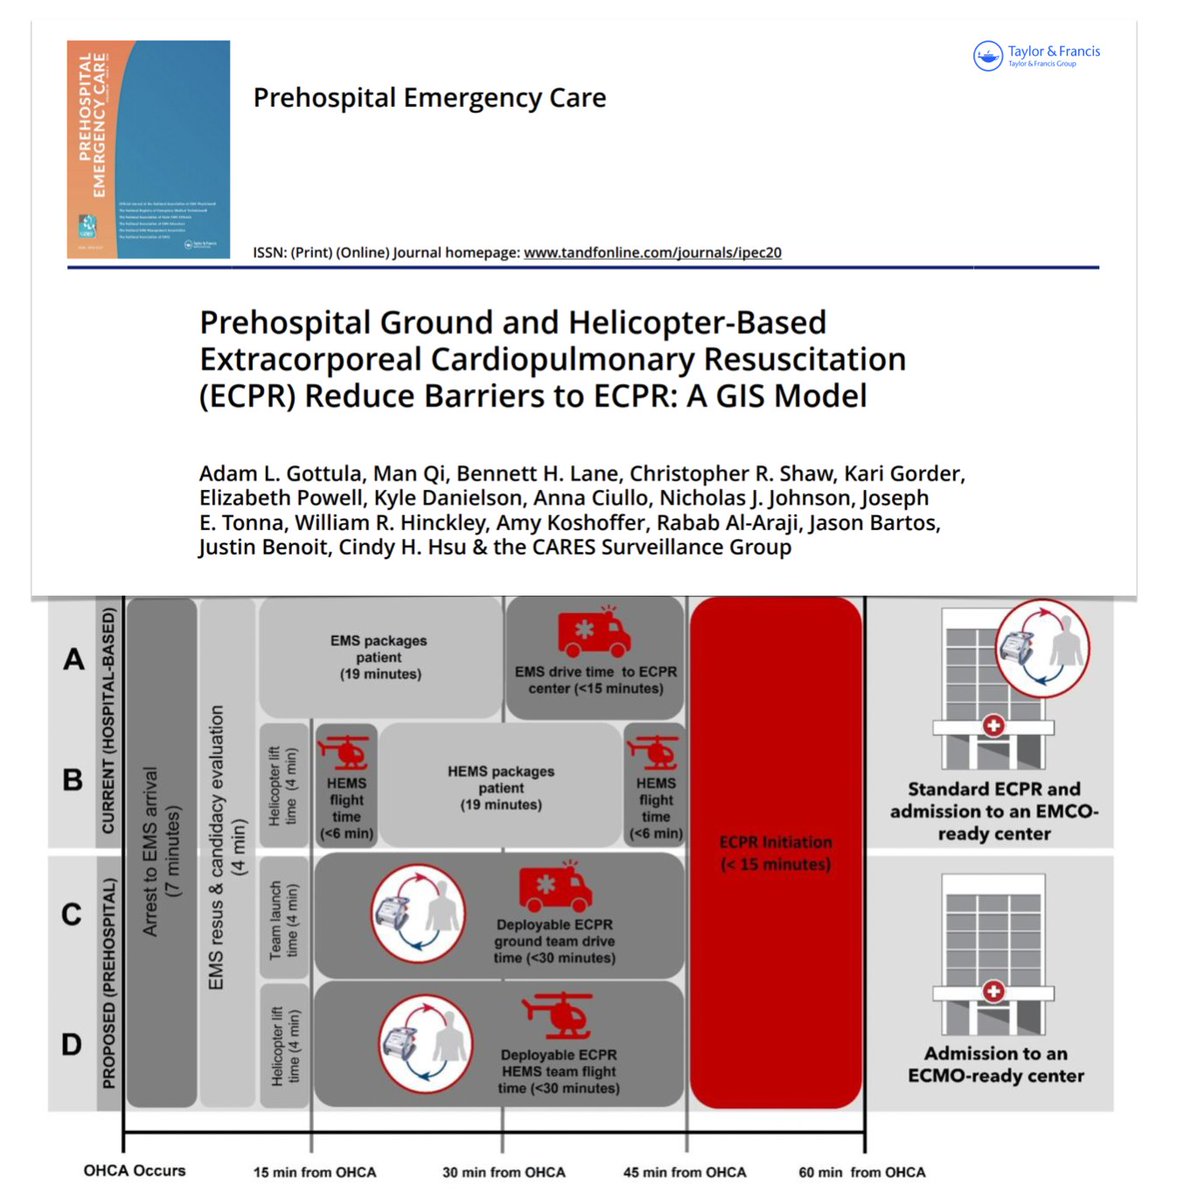 🚑 🚁 Prehospital based #ECPR reduce barriers to #ECLS, potentially improving #OHCA survival! GIS model demonstrating 2-fold ⬆️ in #ECMO eligibility for field-deployable ground-based system & 4-fold ⬆️ for HEMS-based system vs 🇺🇸 hospital-based system 🖇️ bit.ly/4bEE0TK